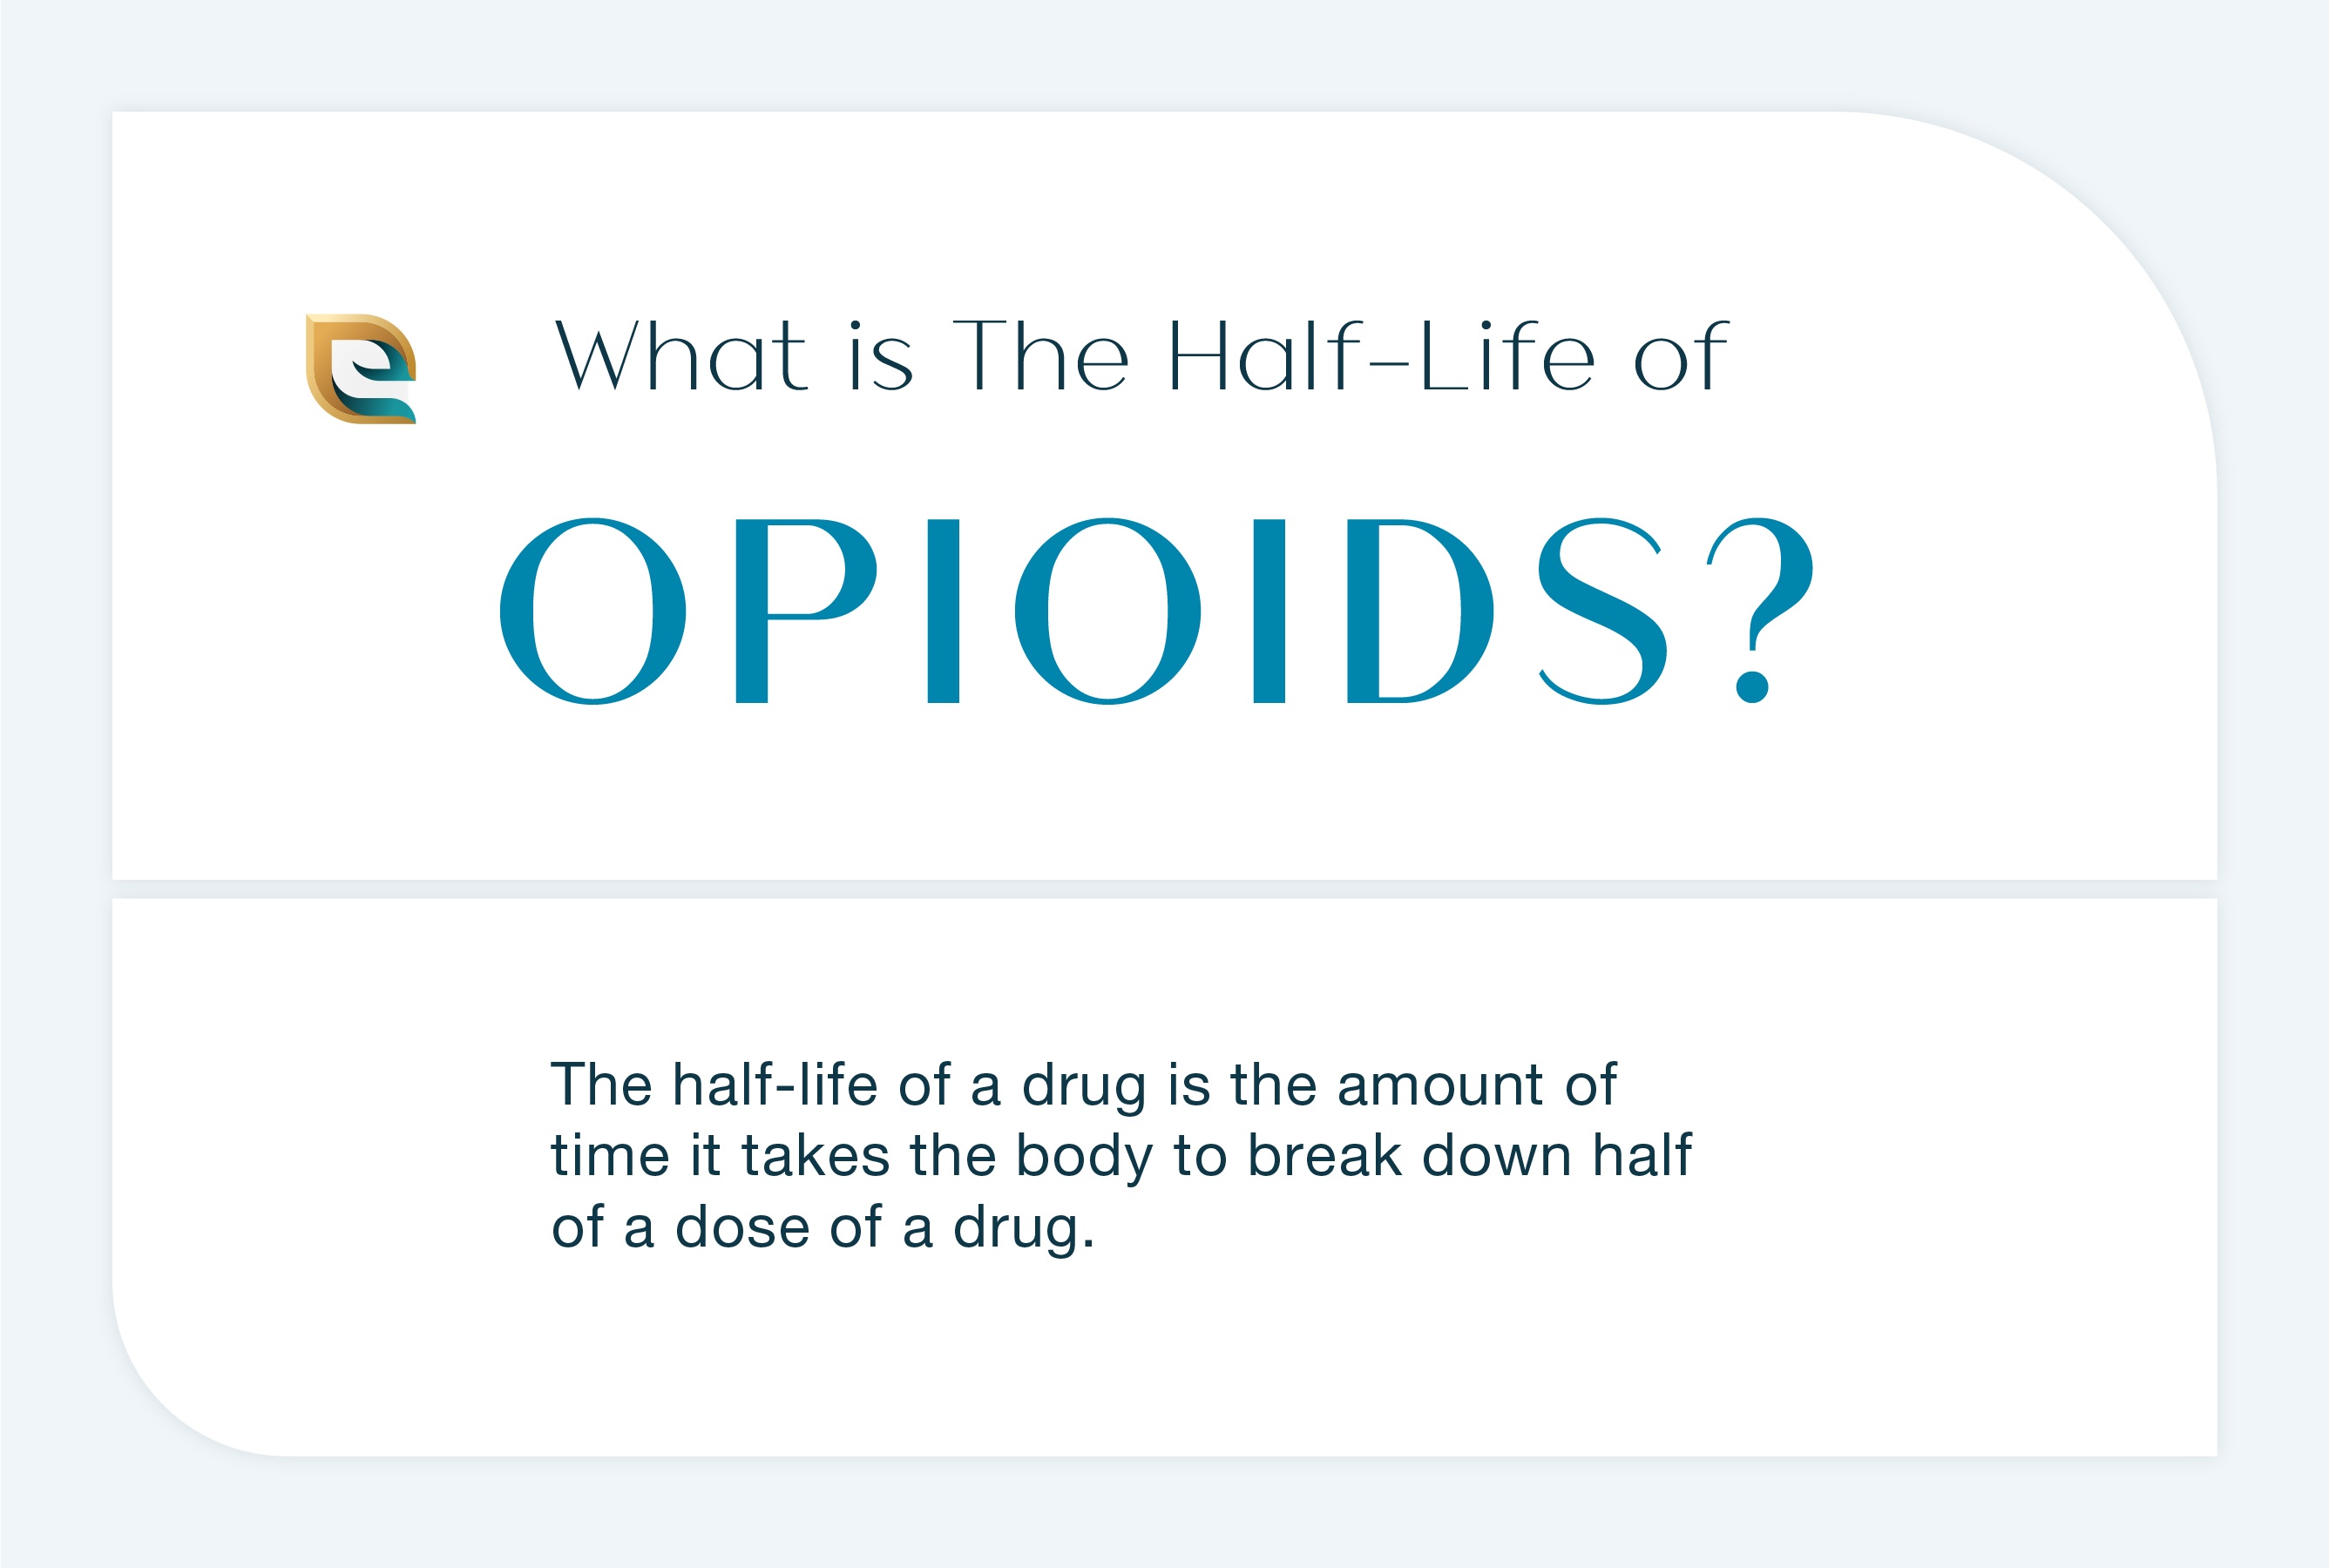 What Is The Half Life of Opioids? This image describes the half life of Opioids.